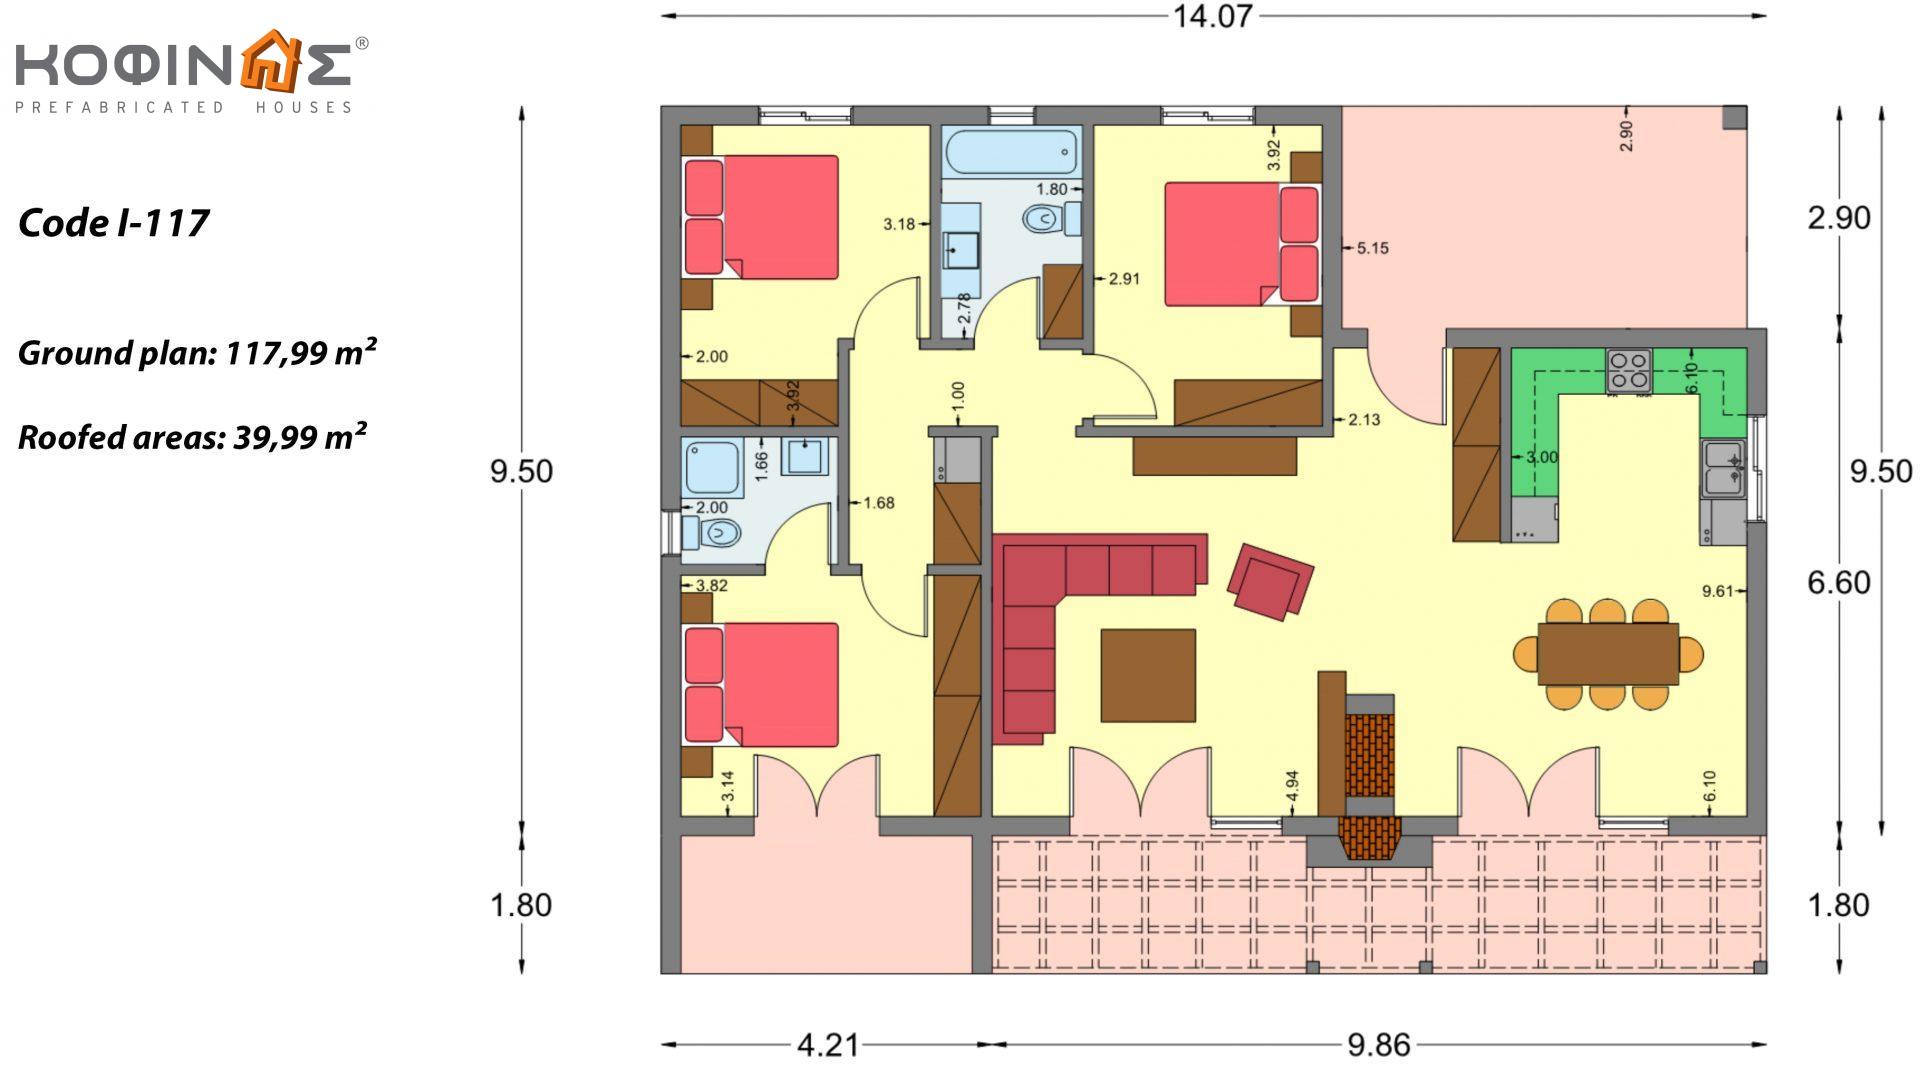 1-story house I-117, total surface of 117,99 m², roofed areas 39,99 m²